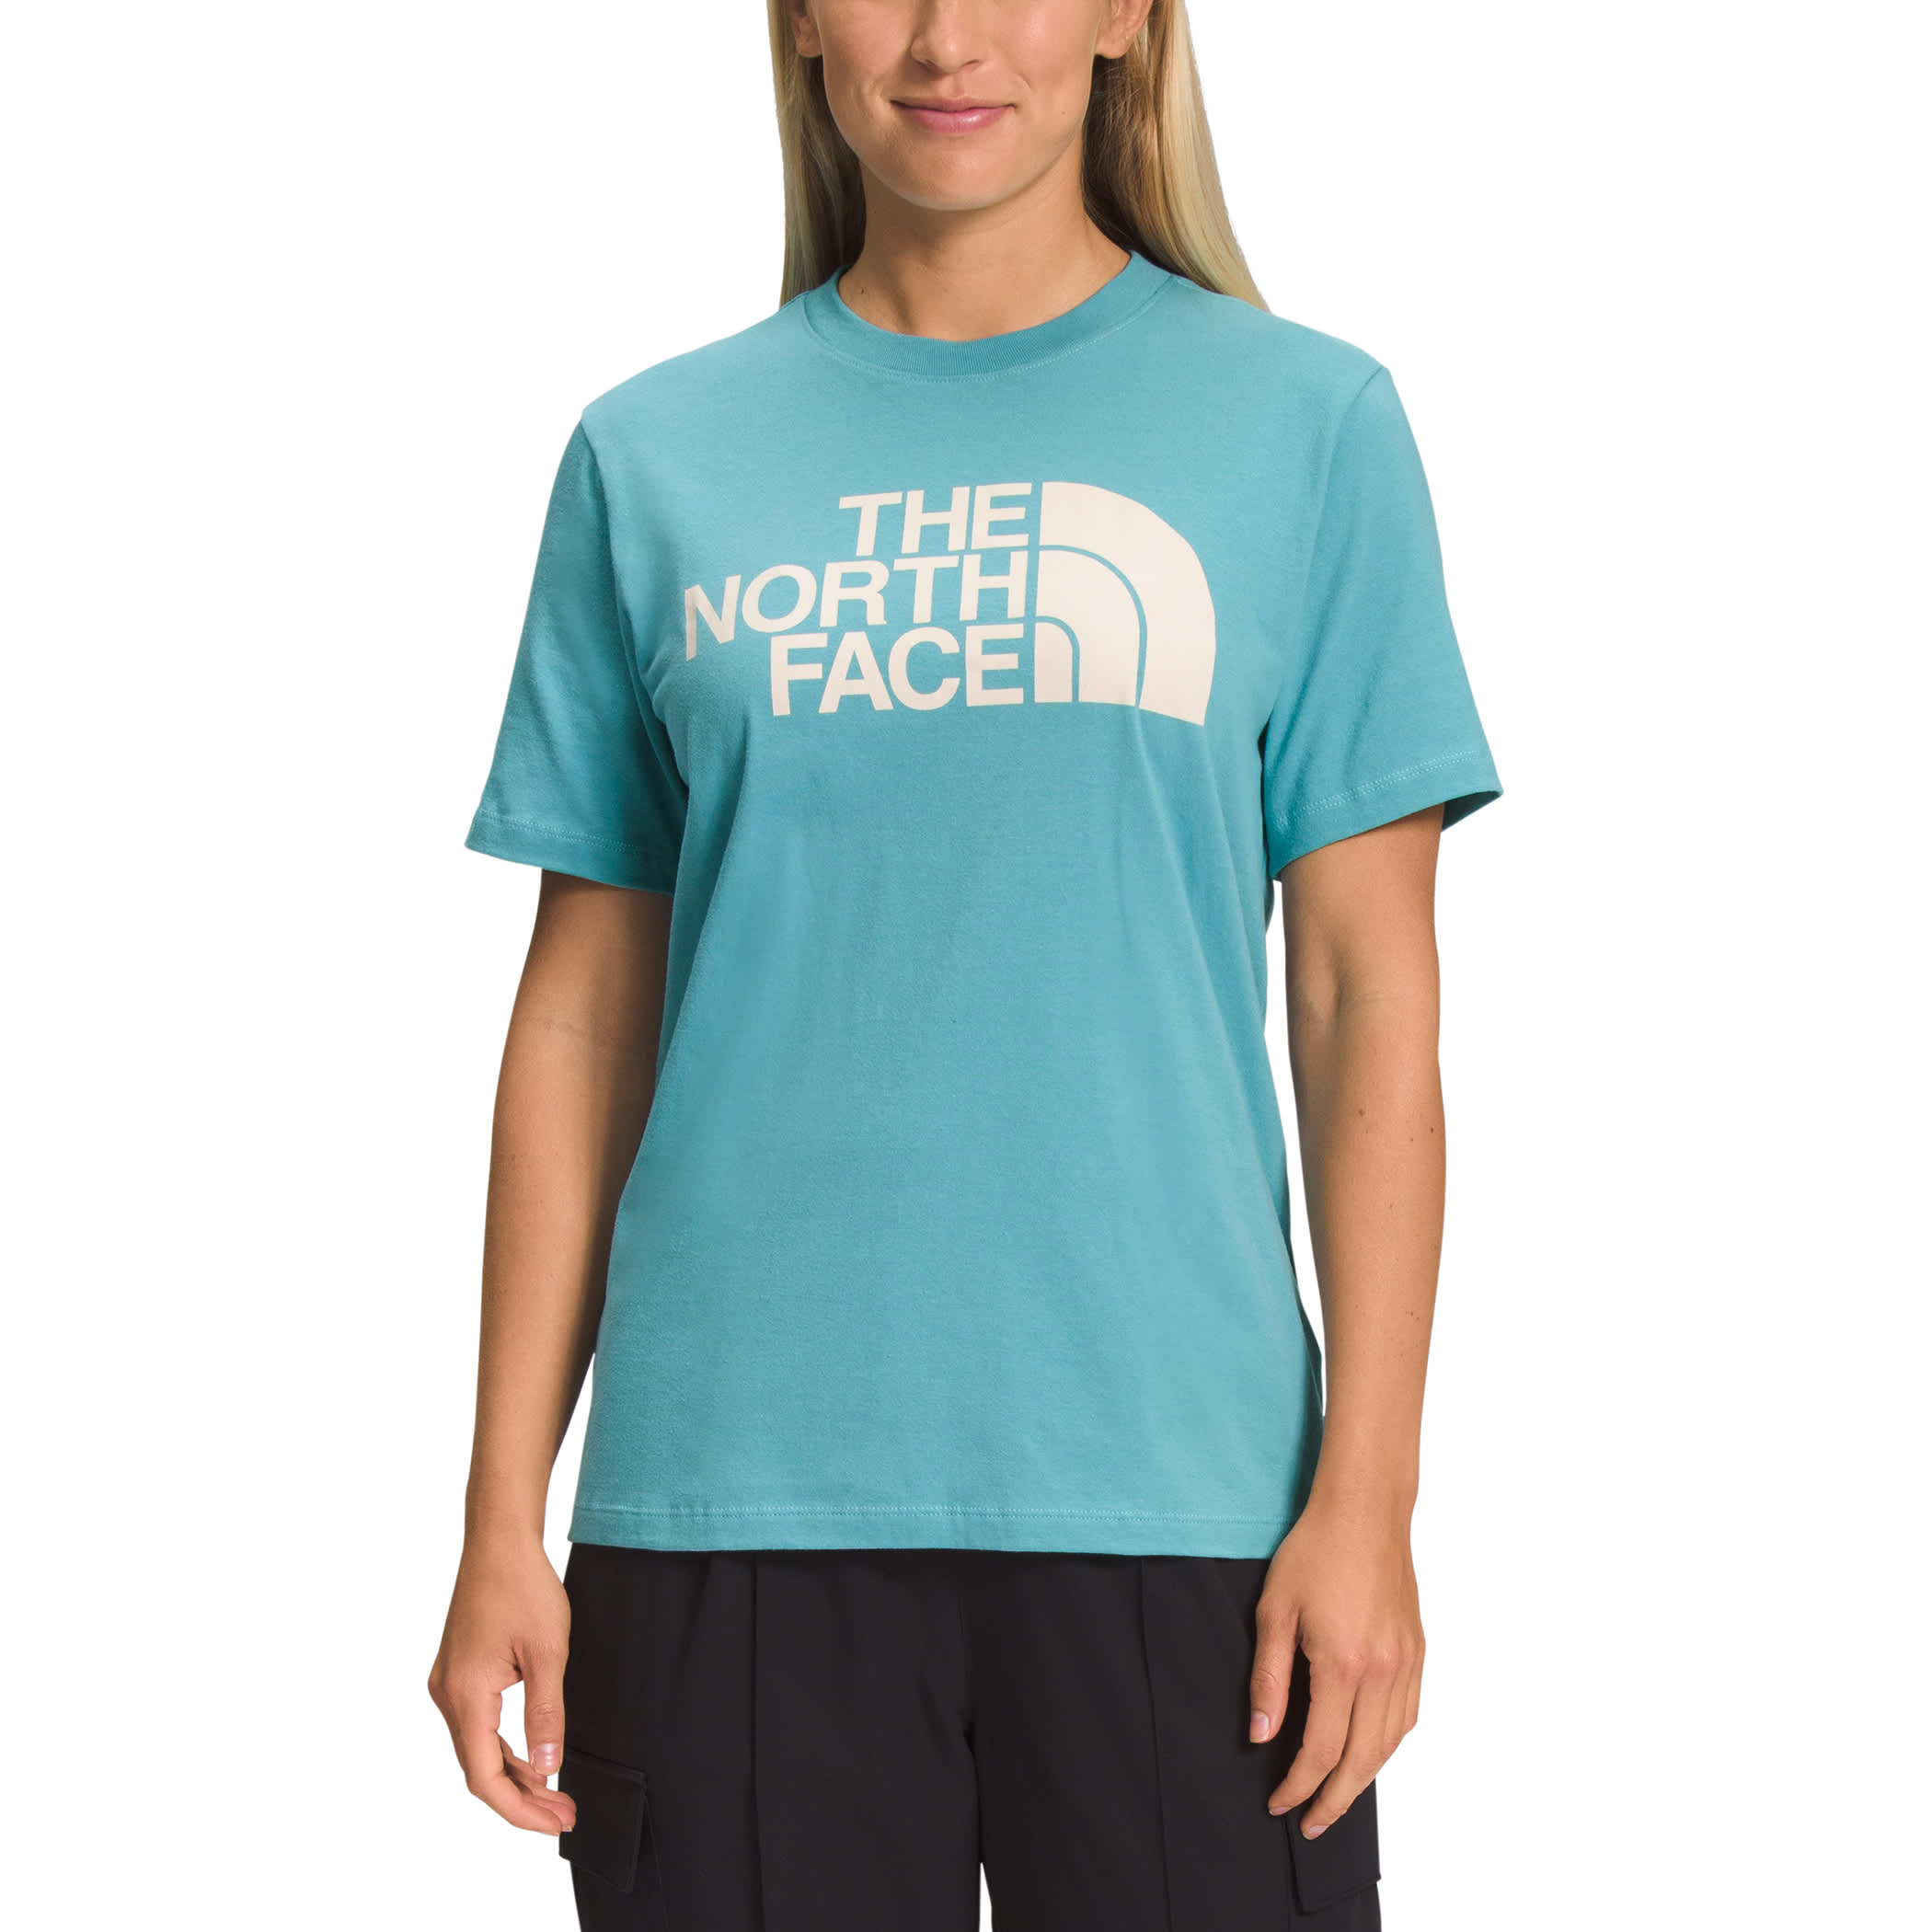 The North Face Women’s Half Dome Short Sleeve T-Shirt - Cabelas 